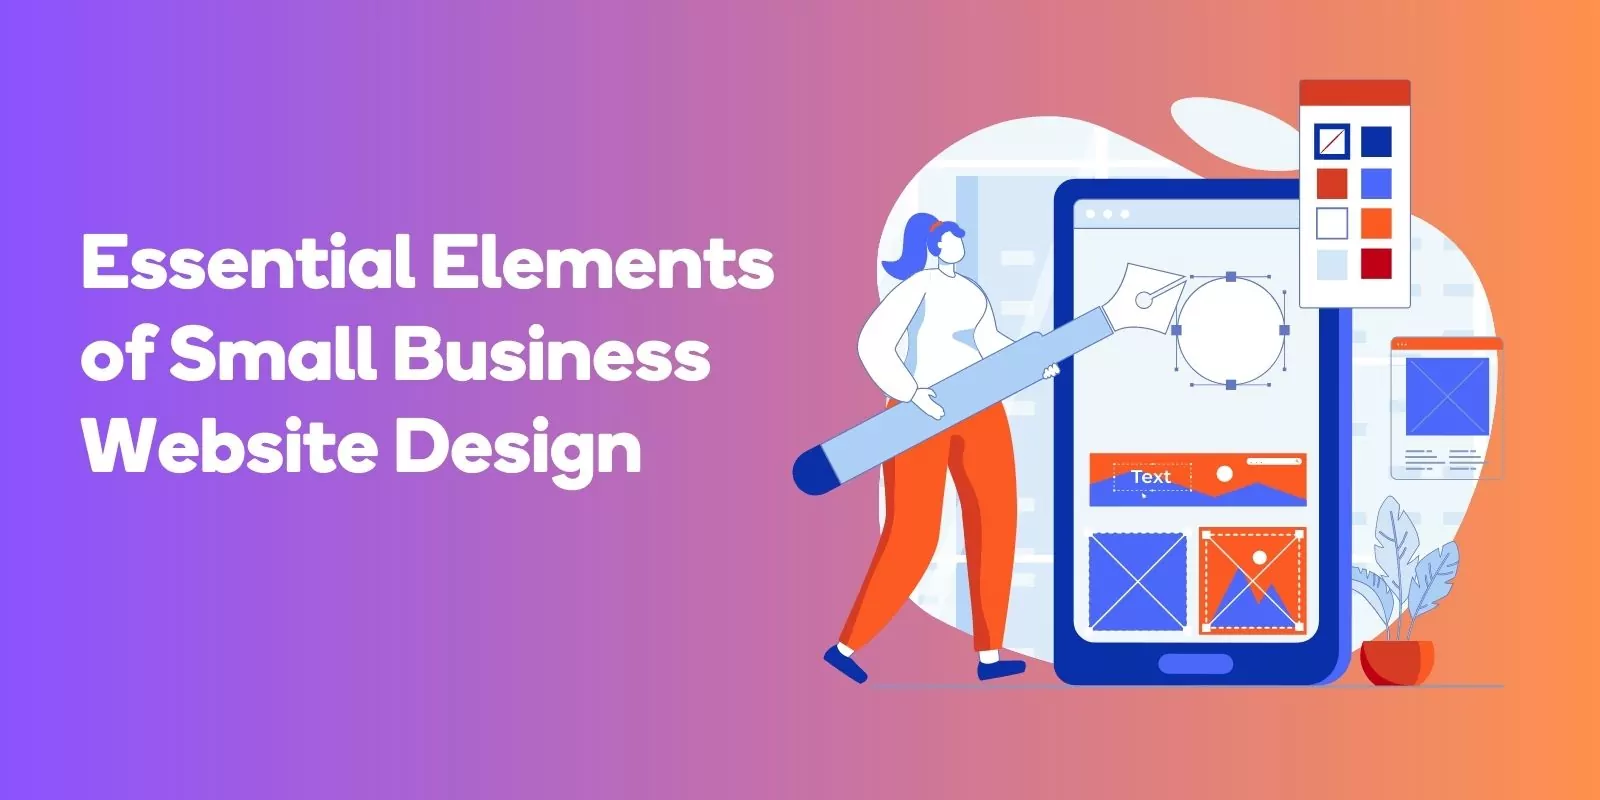 Essential Elements of Small Business Website Design